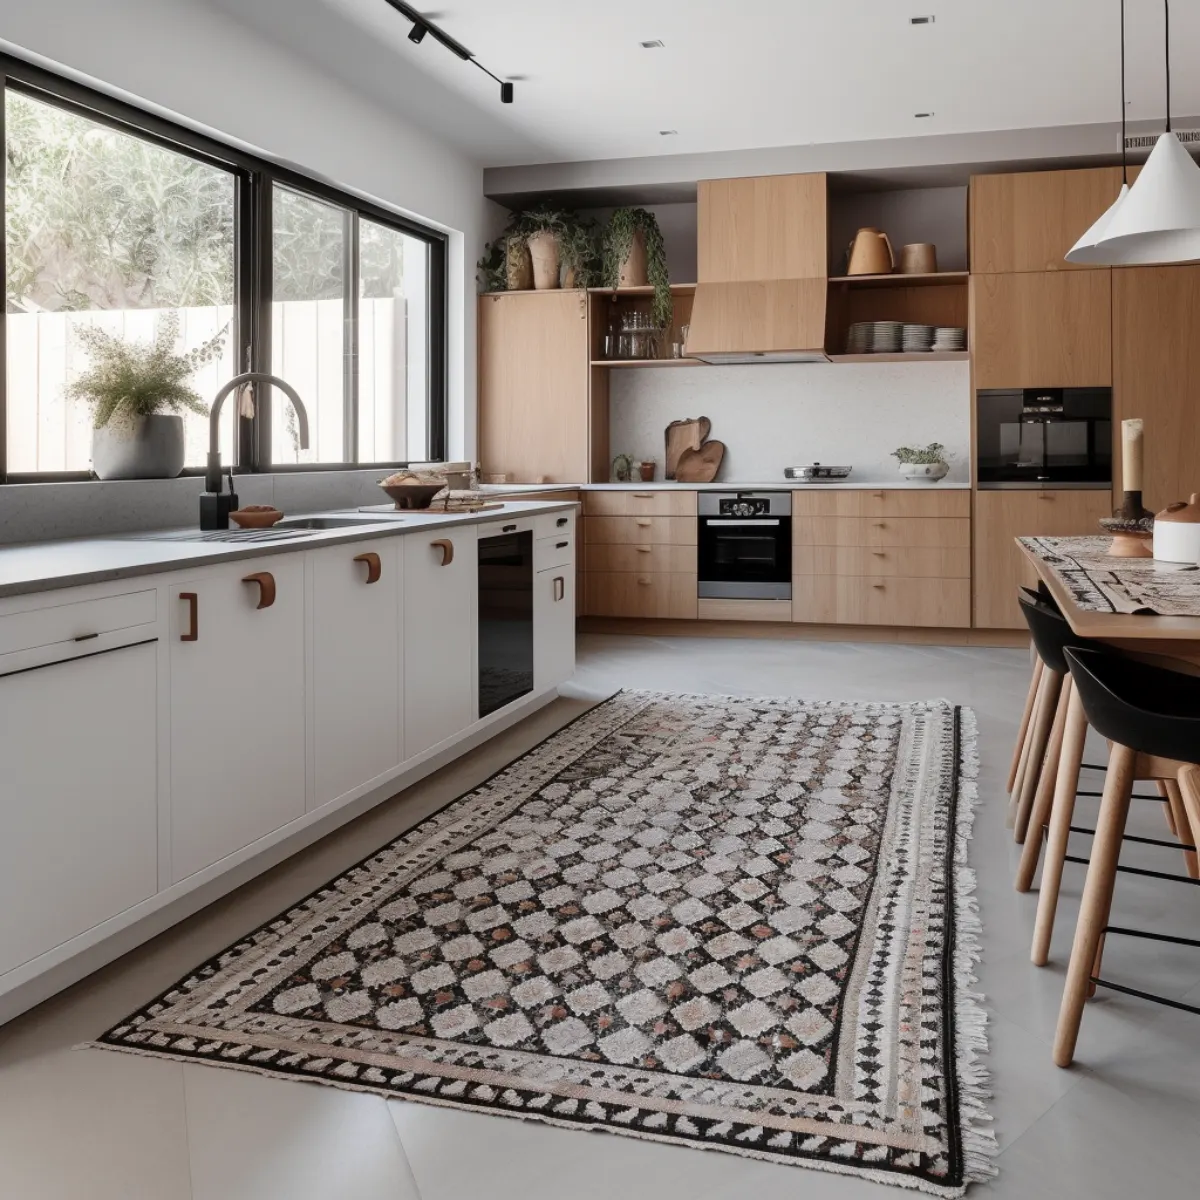 Modern Kitchen With Iranian Carpet With Repeating Design.webp